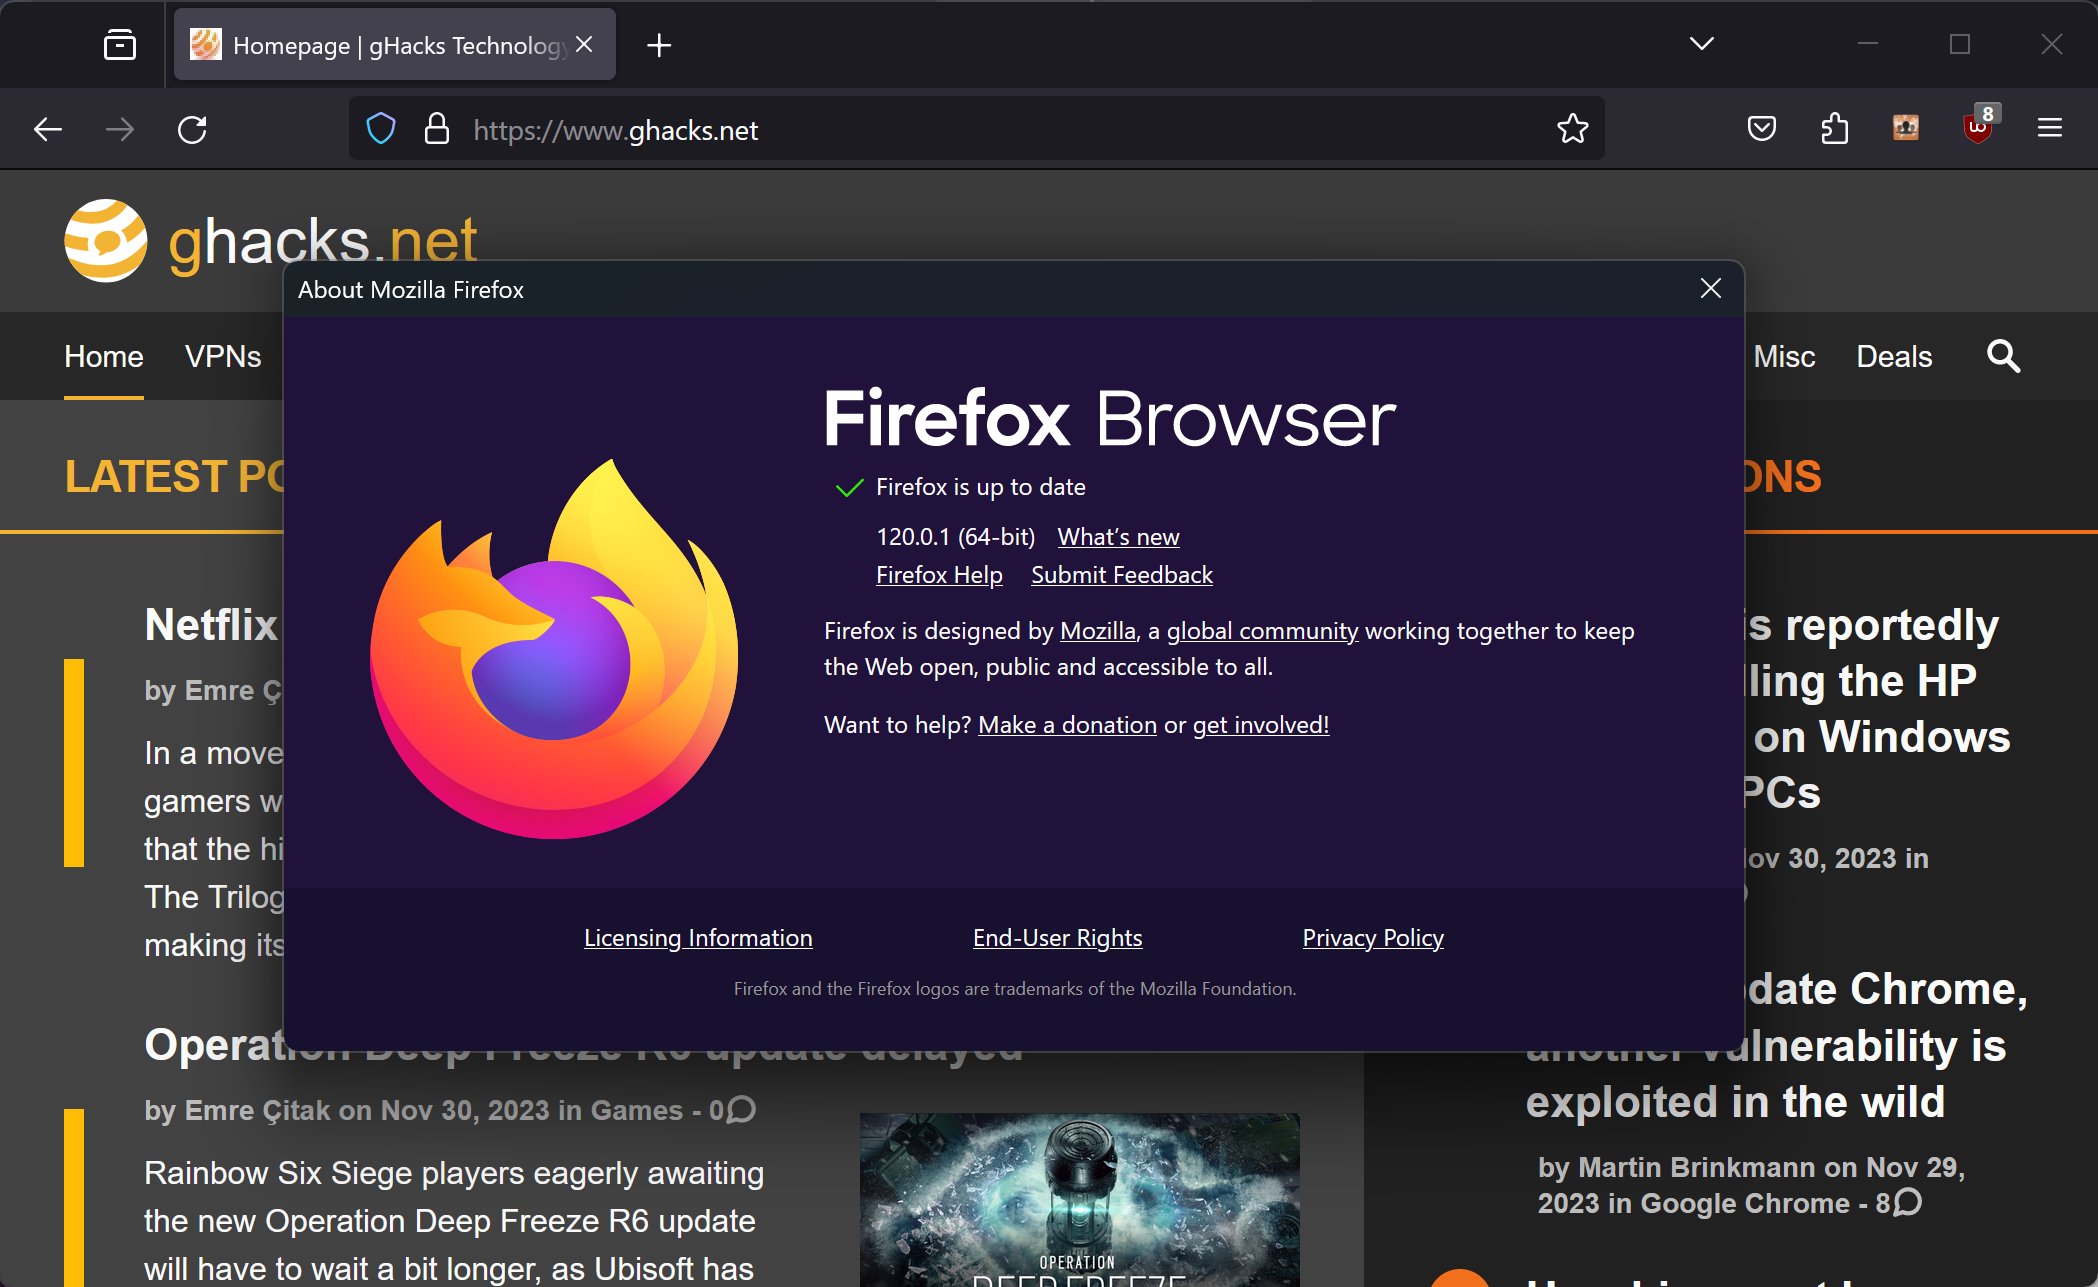 Firefox 120.0.1 update fixes issue that caused 100% CPU usage on some sites